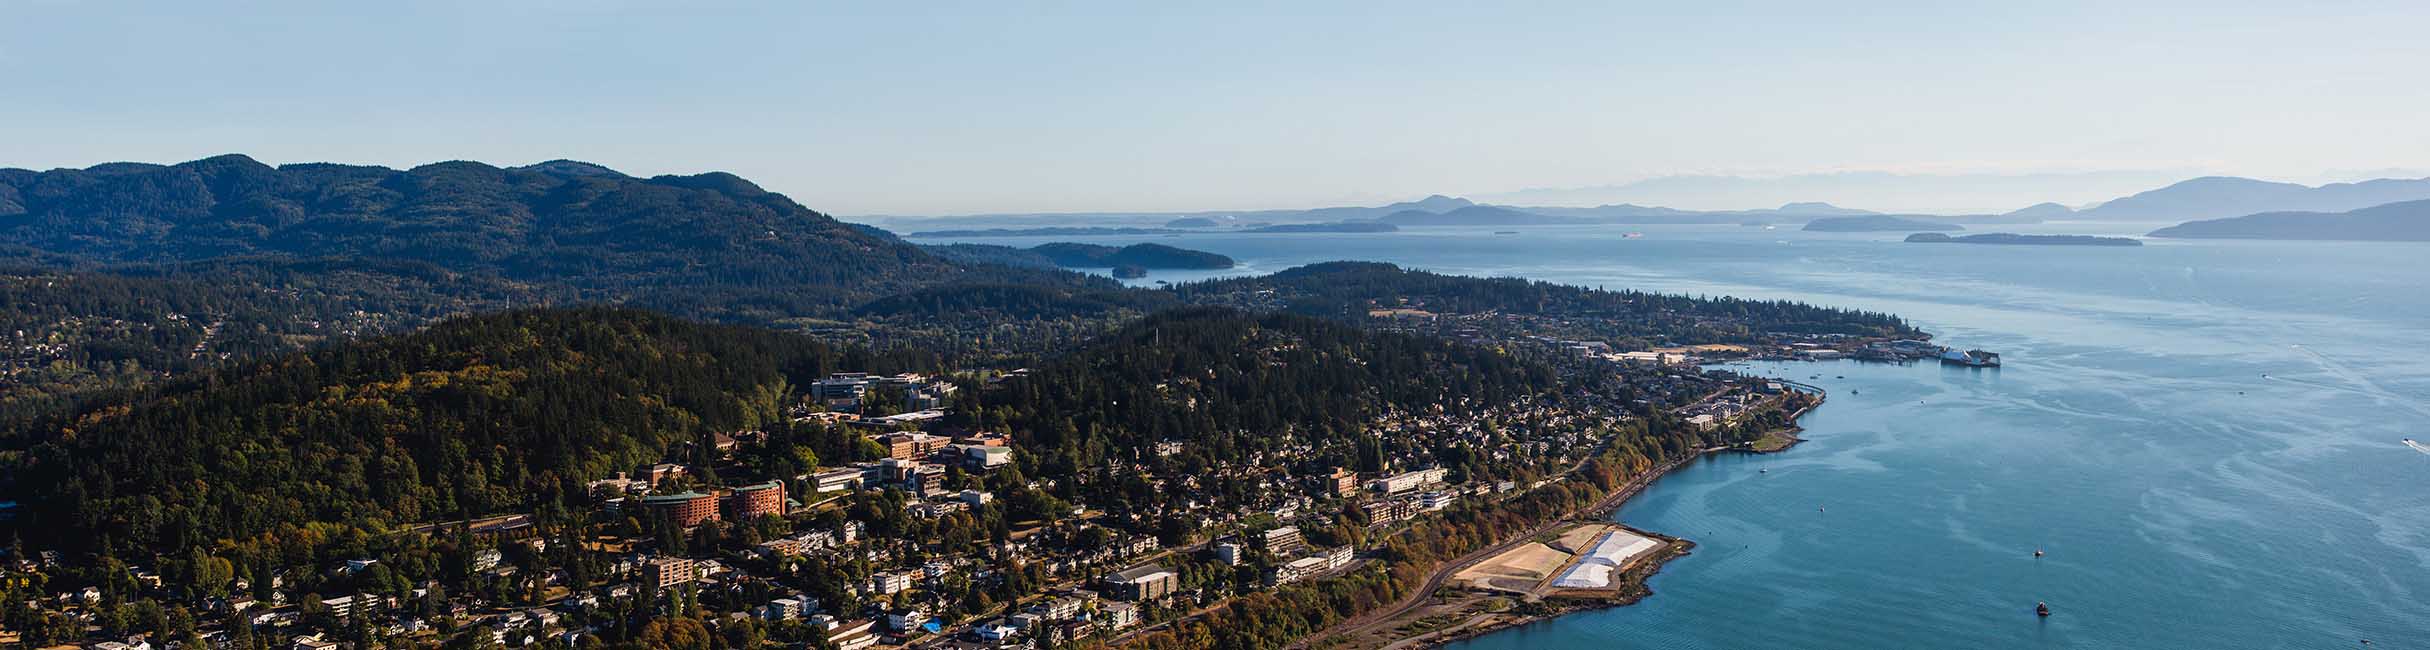 Bellingham Bay coastline with hills covered in trees and buildings